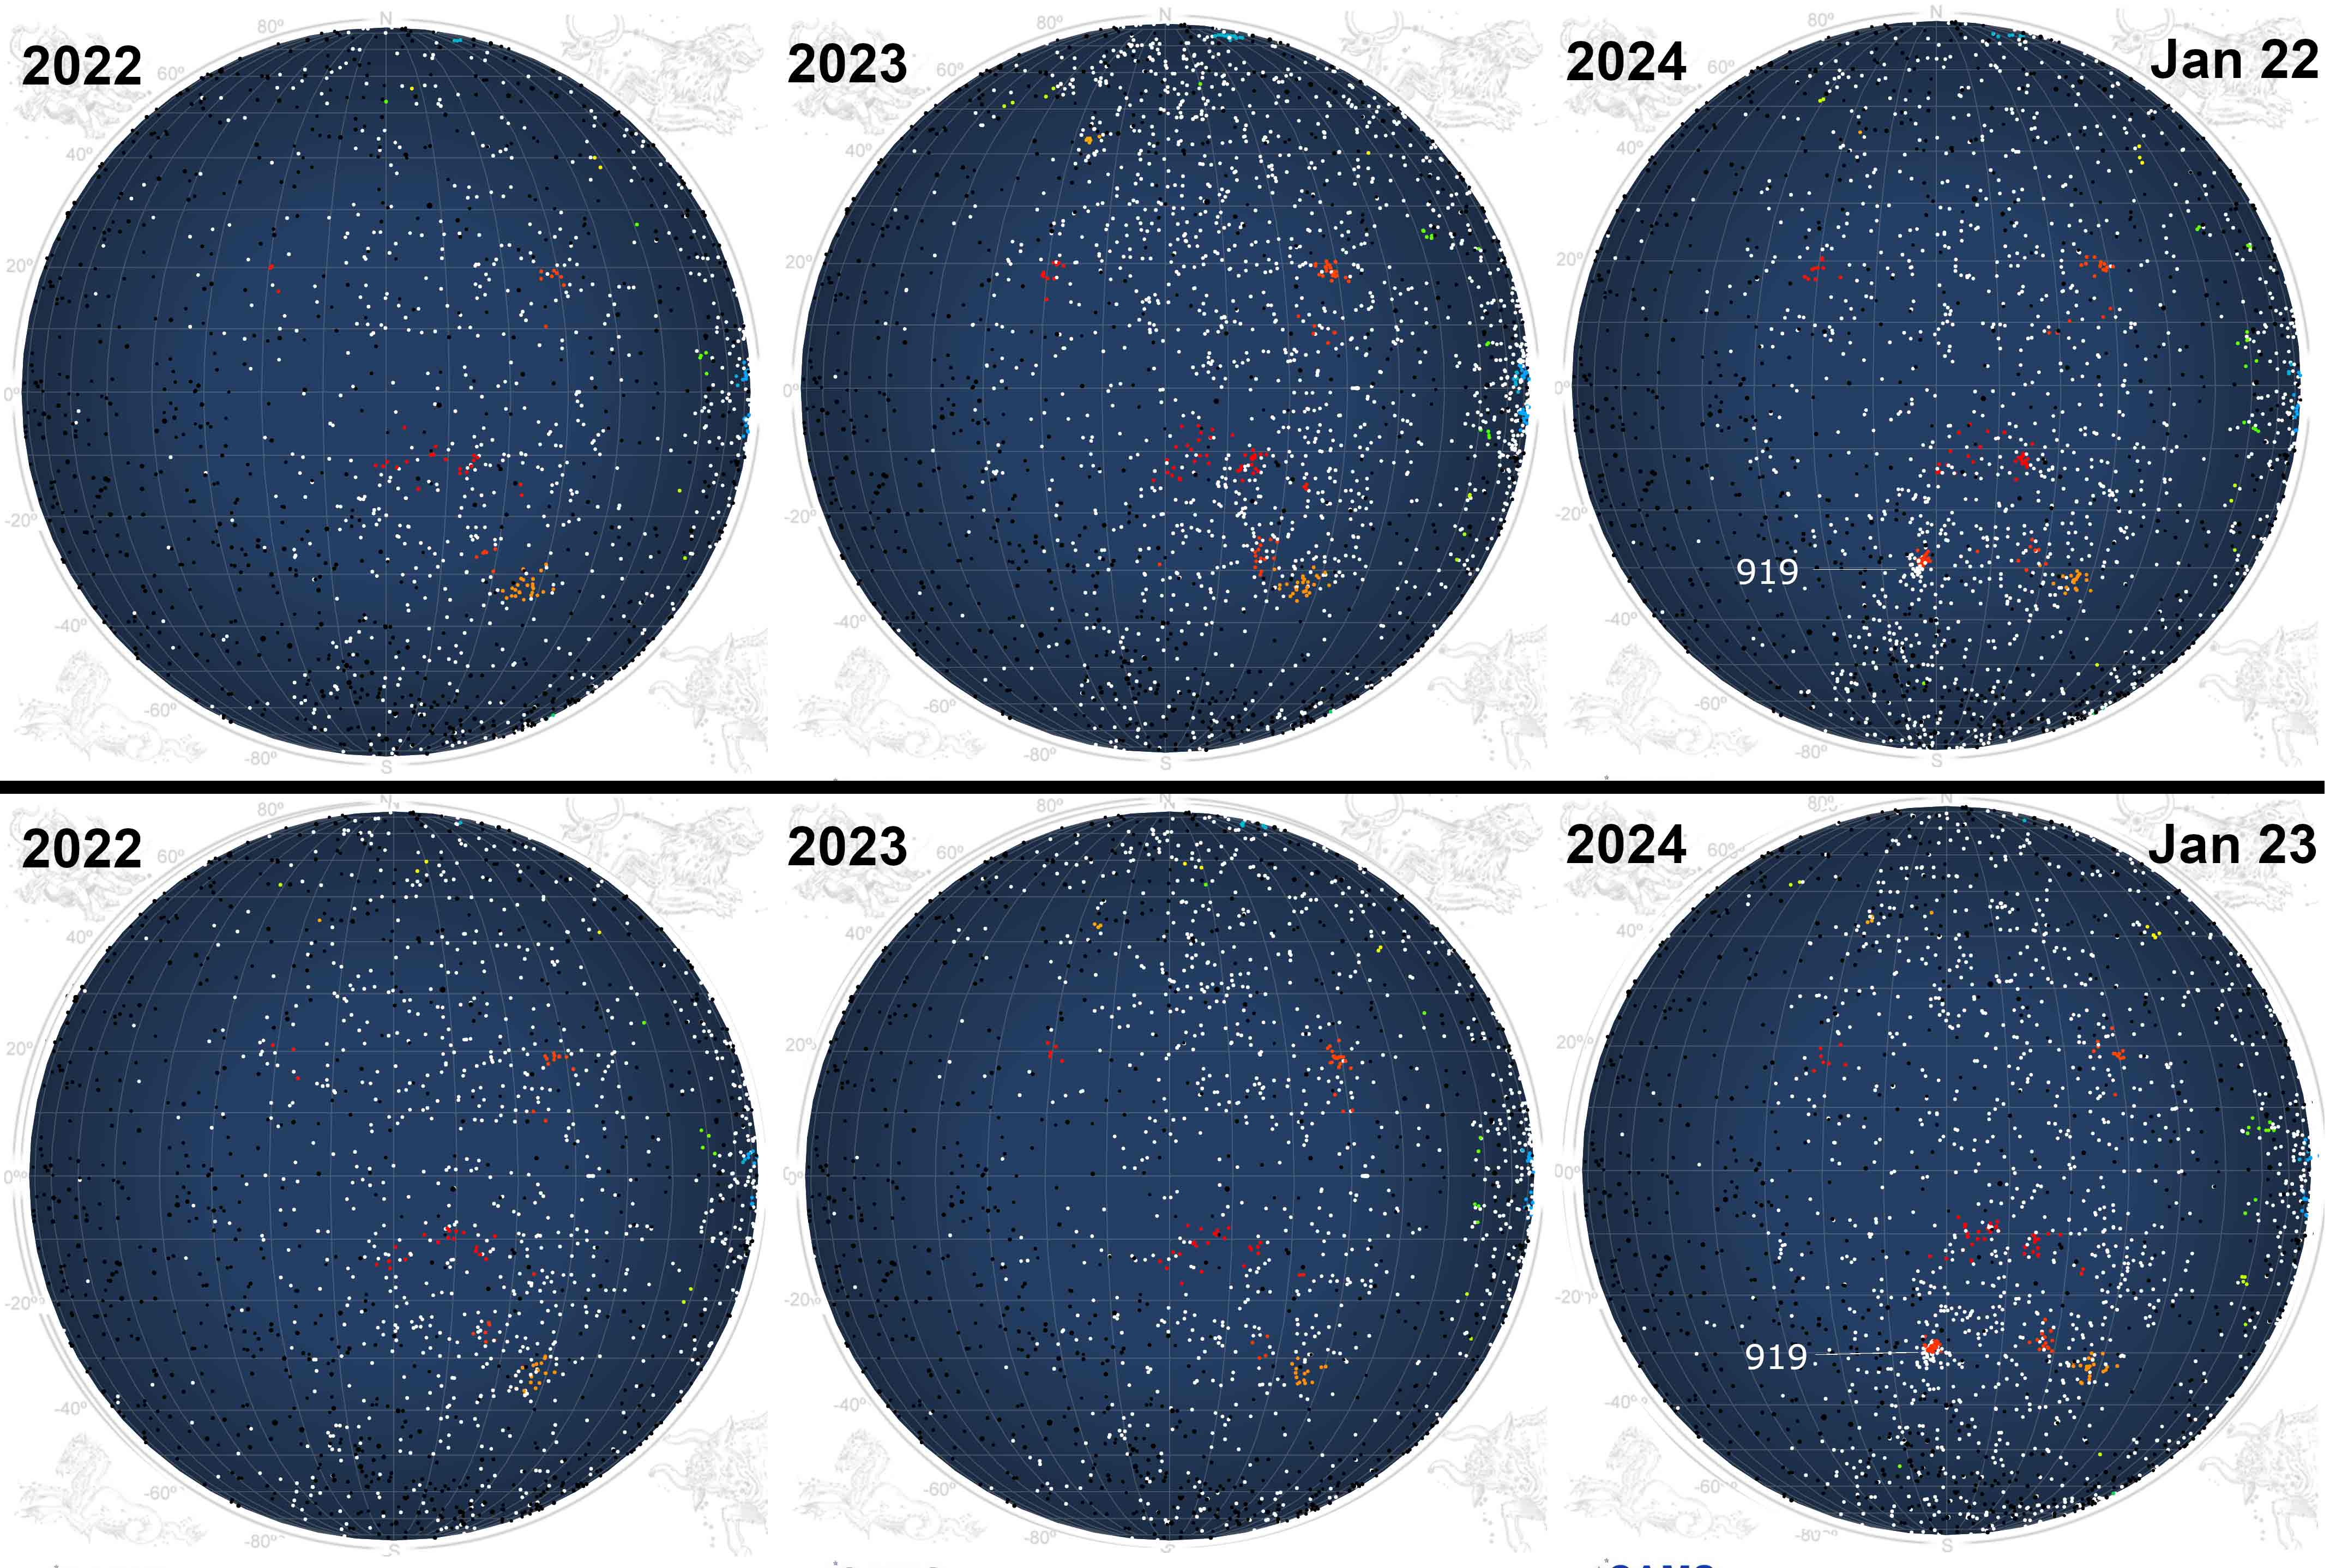 composite images showing the radiant distributions on January 22 and January 23 in the years of 2022, 2023 and 2024, with the 2024 meteor shower outburst marked as "919".